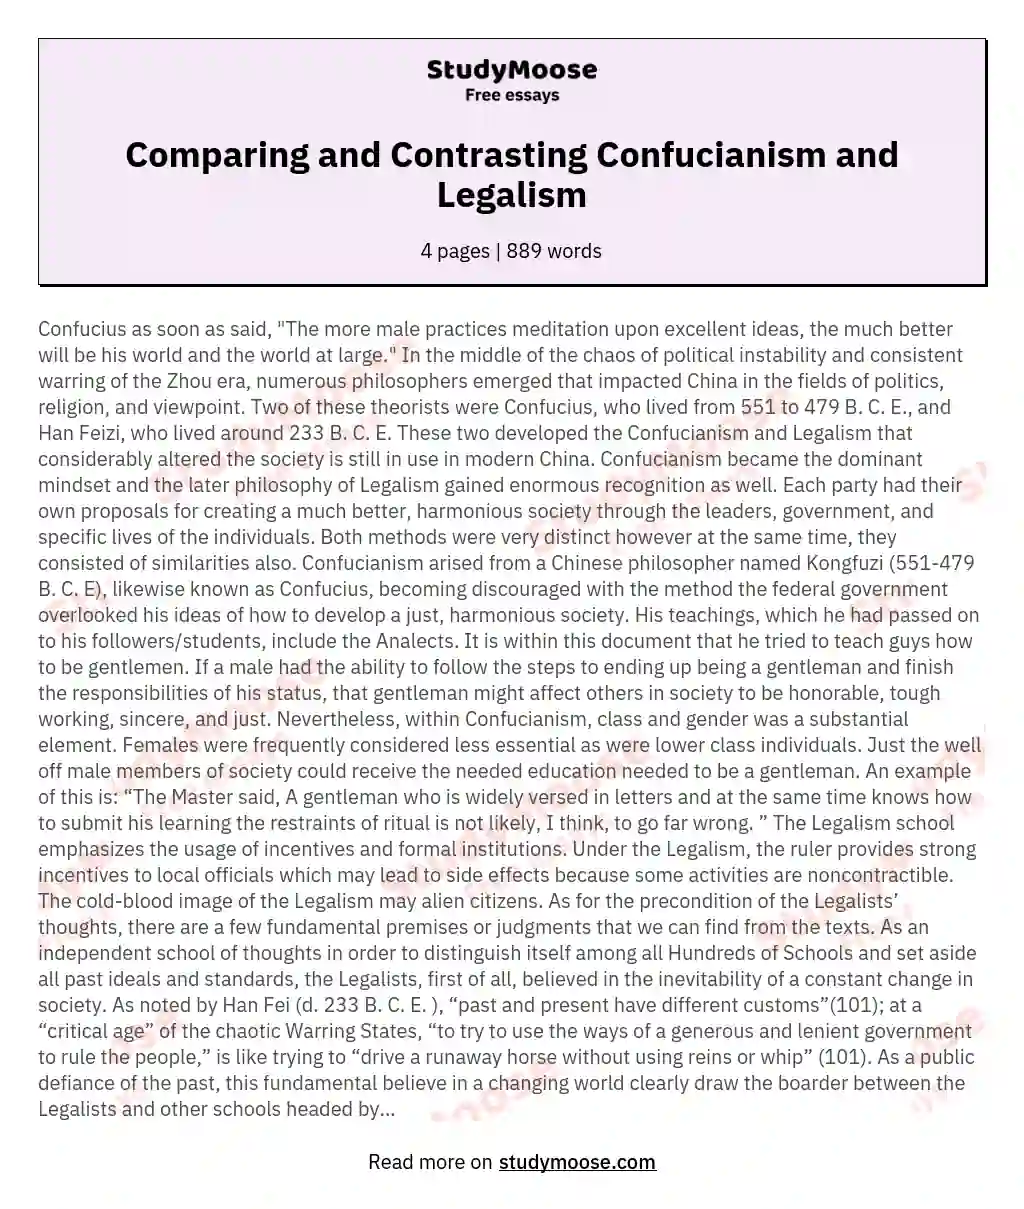 Comparing and Contrasting Confucianism and Legalism